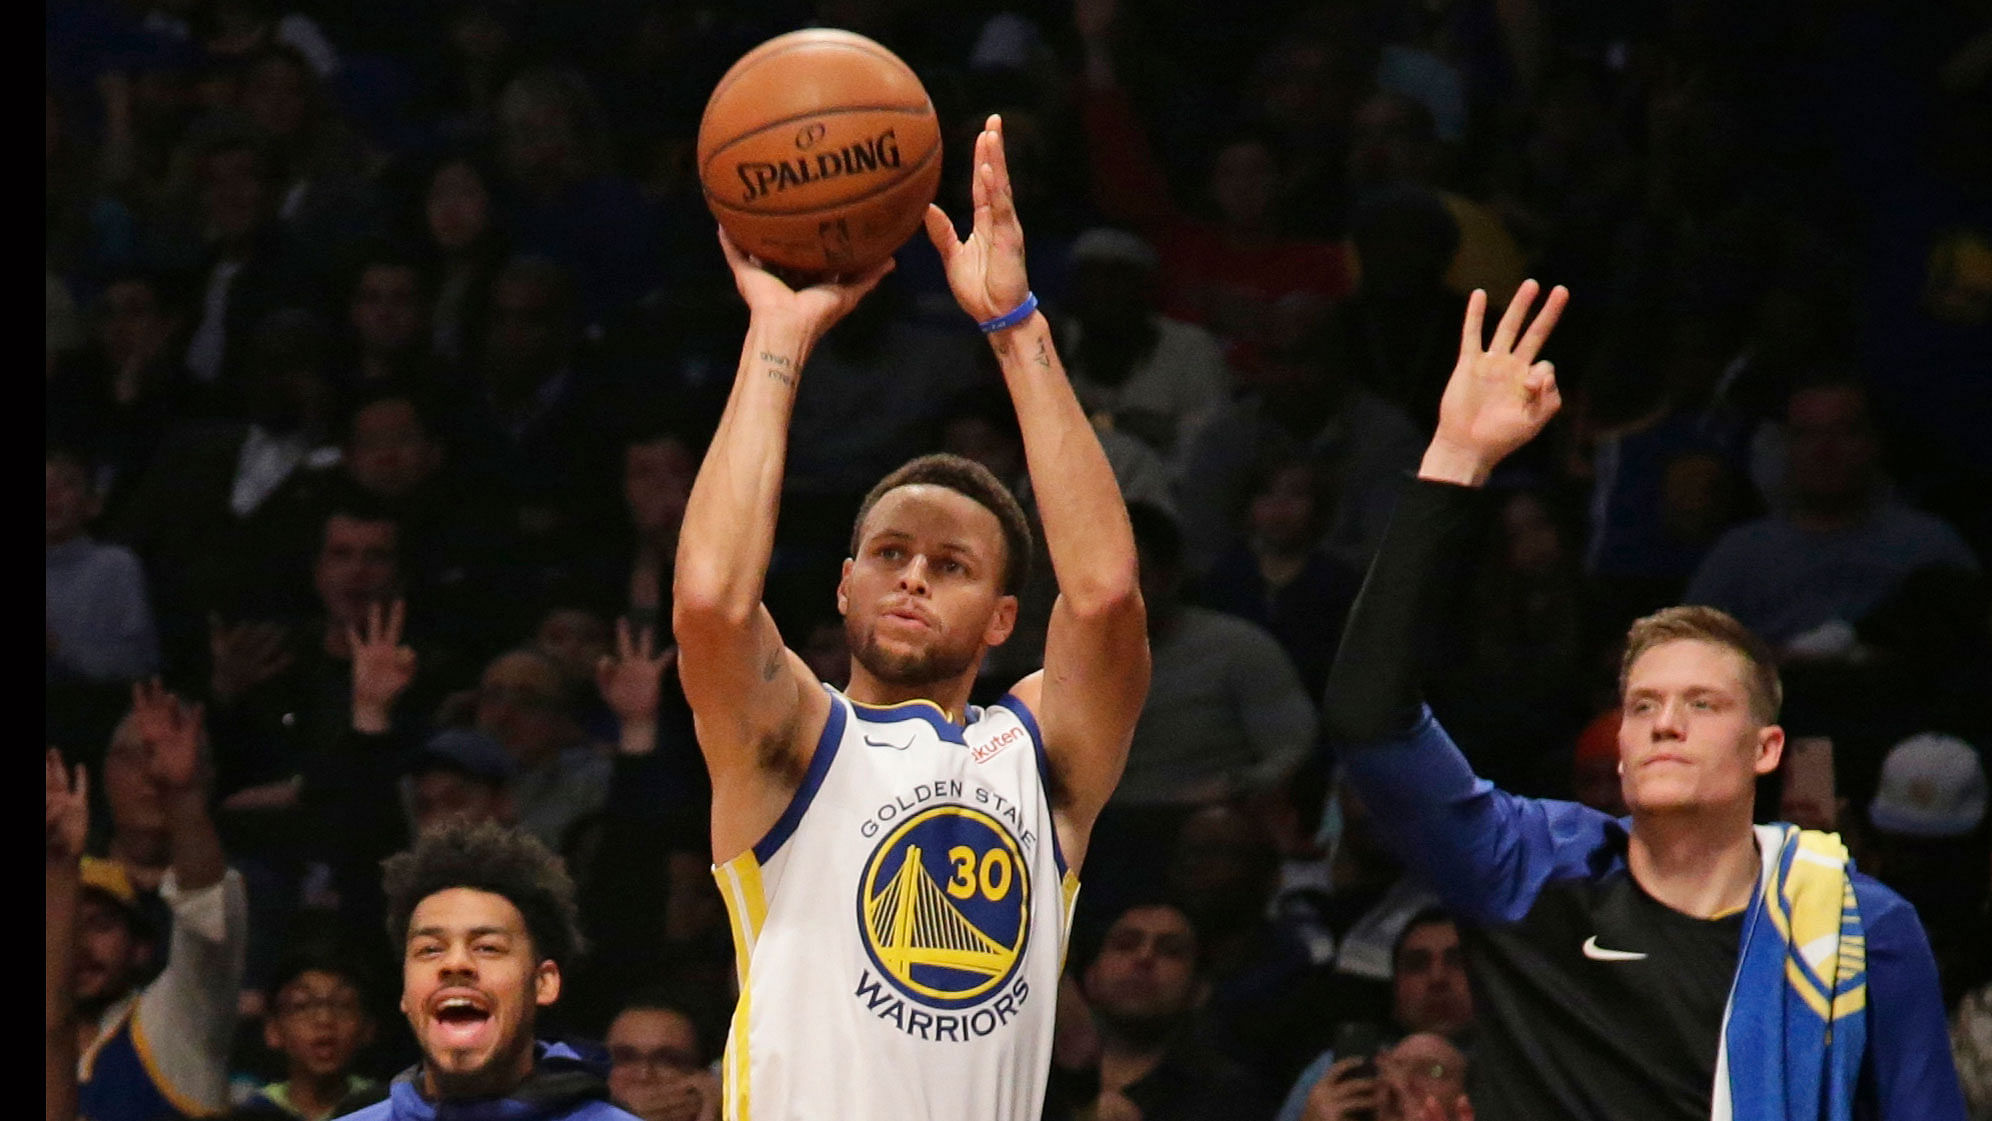 Stephen Curry set another NBA record by making seven 3-pointers.